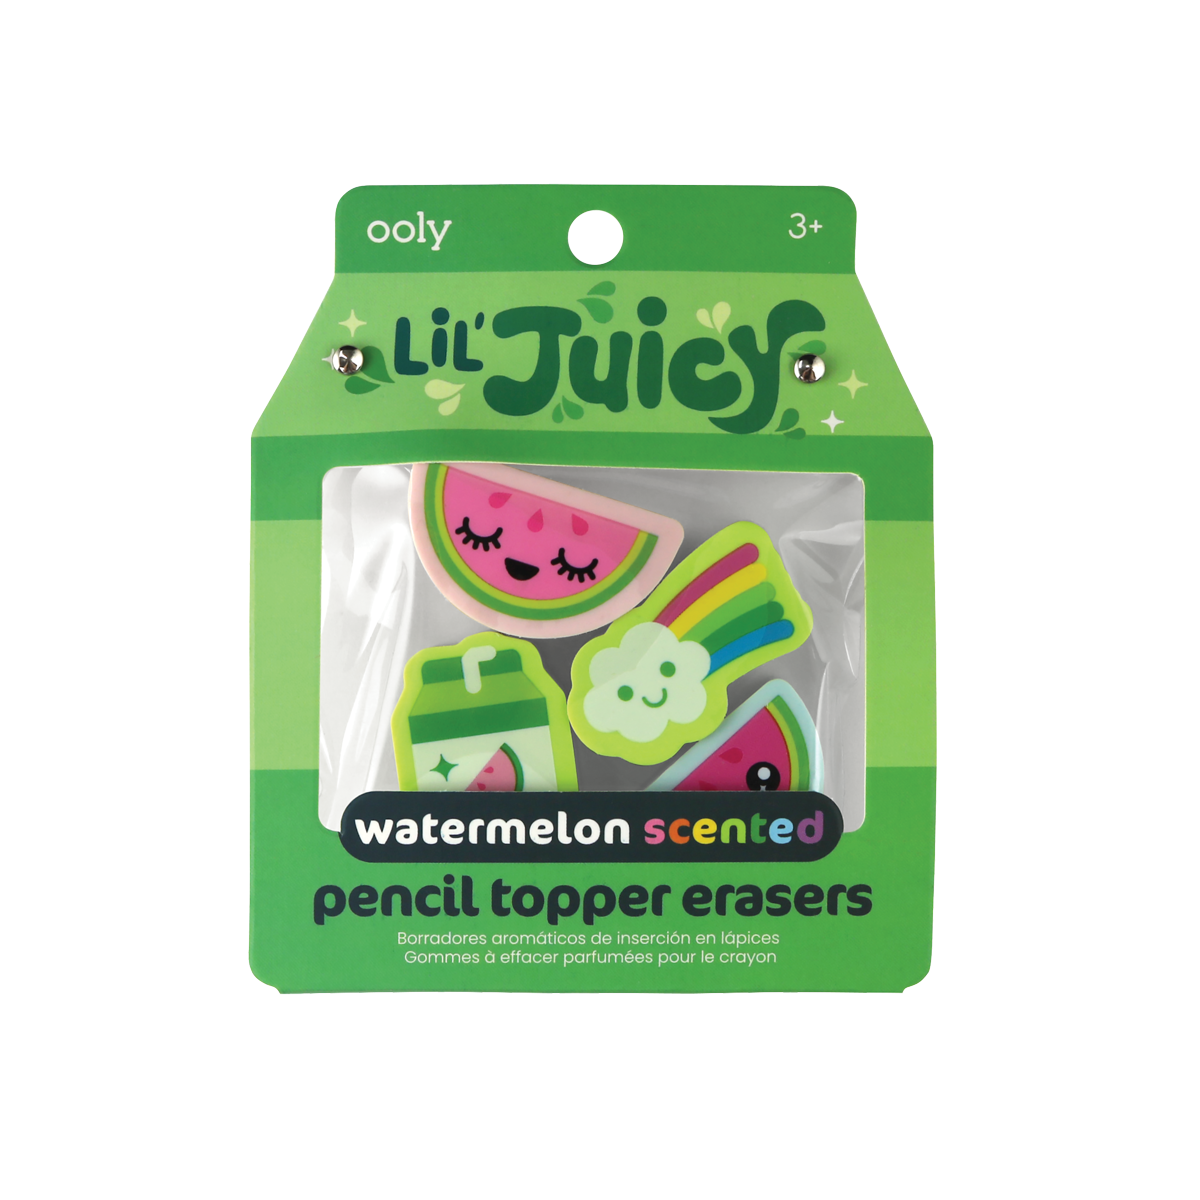 OOLY Lil' Juicy Scented Topper Eraser - watermelon